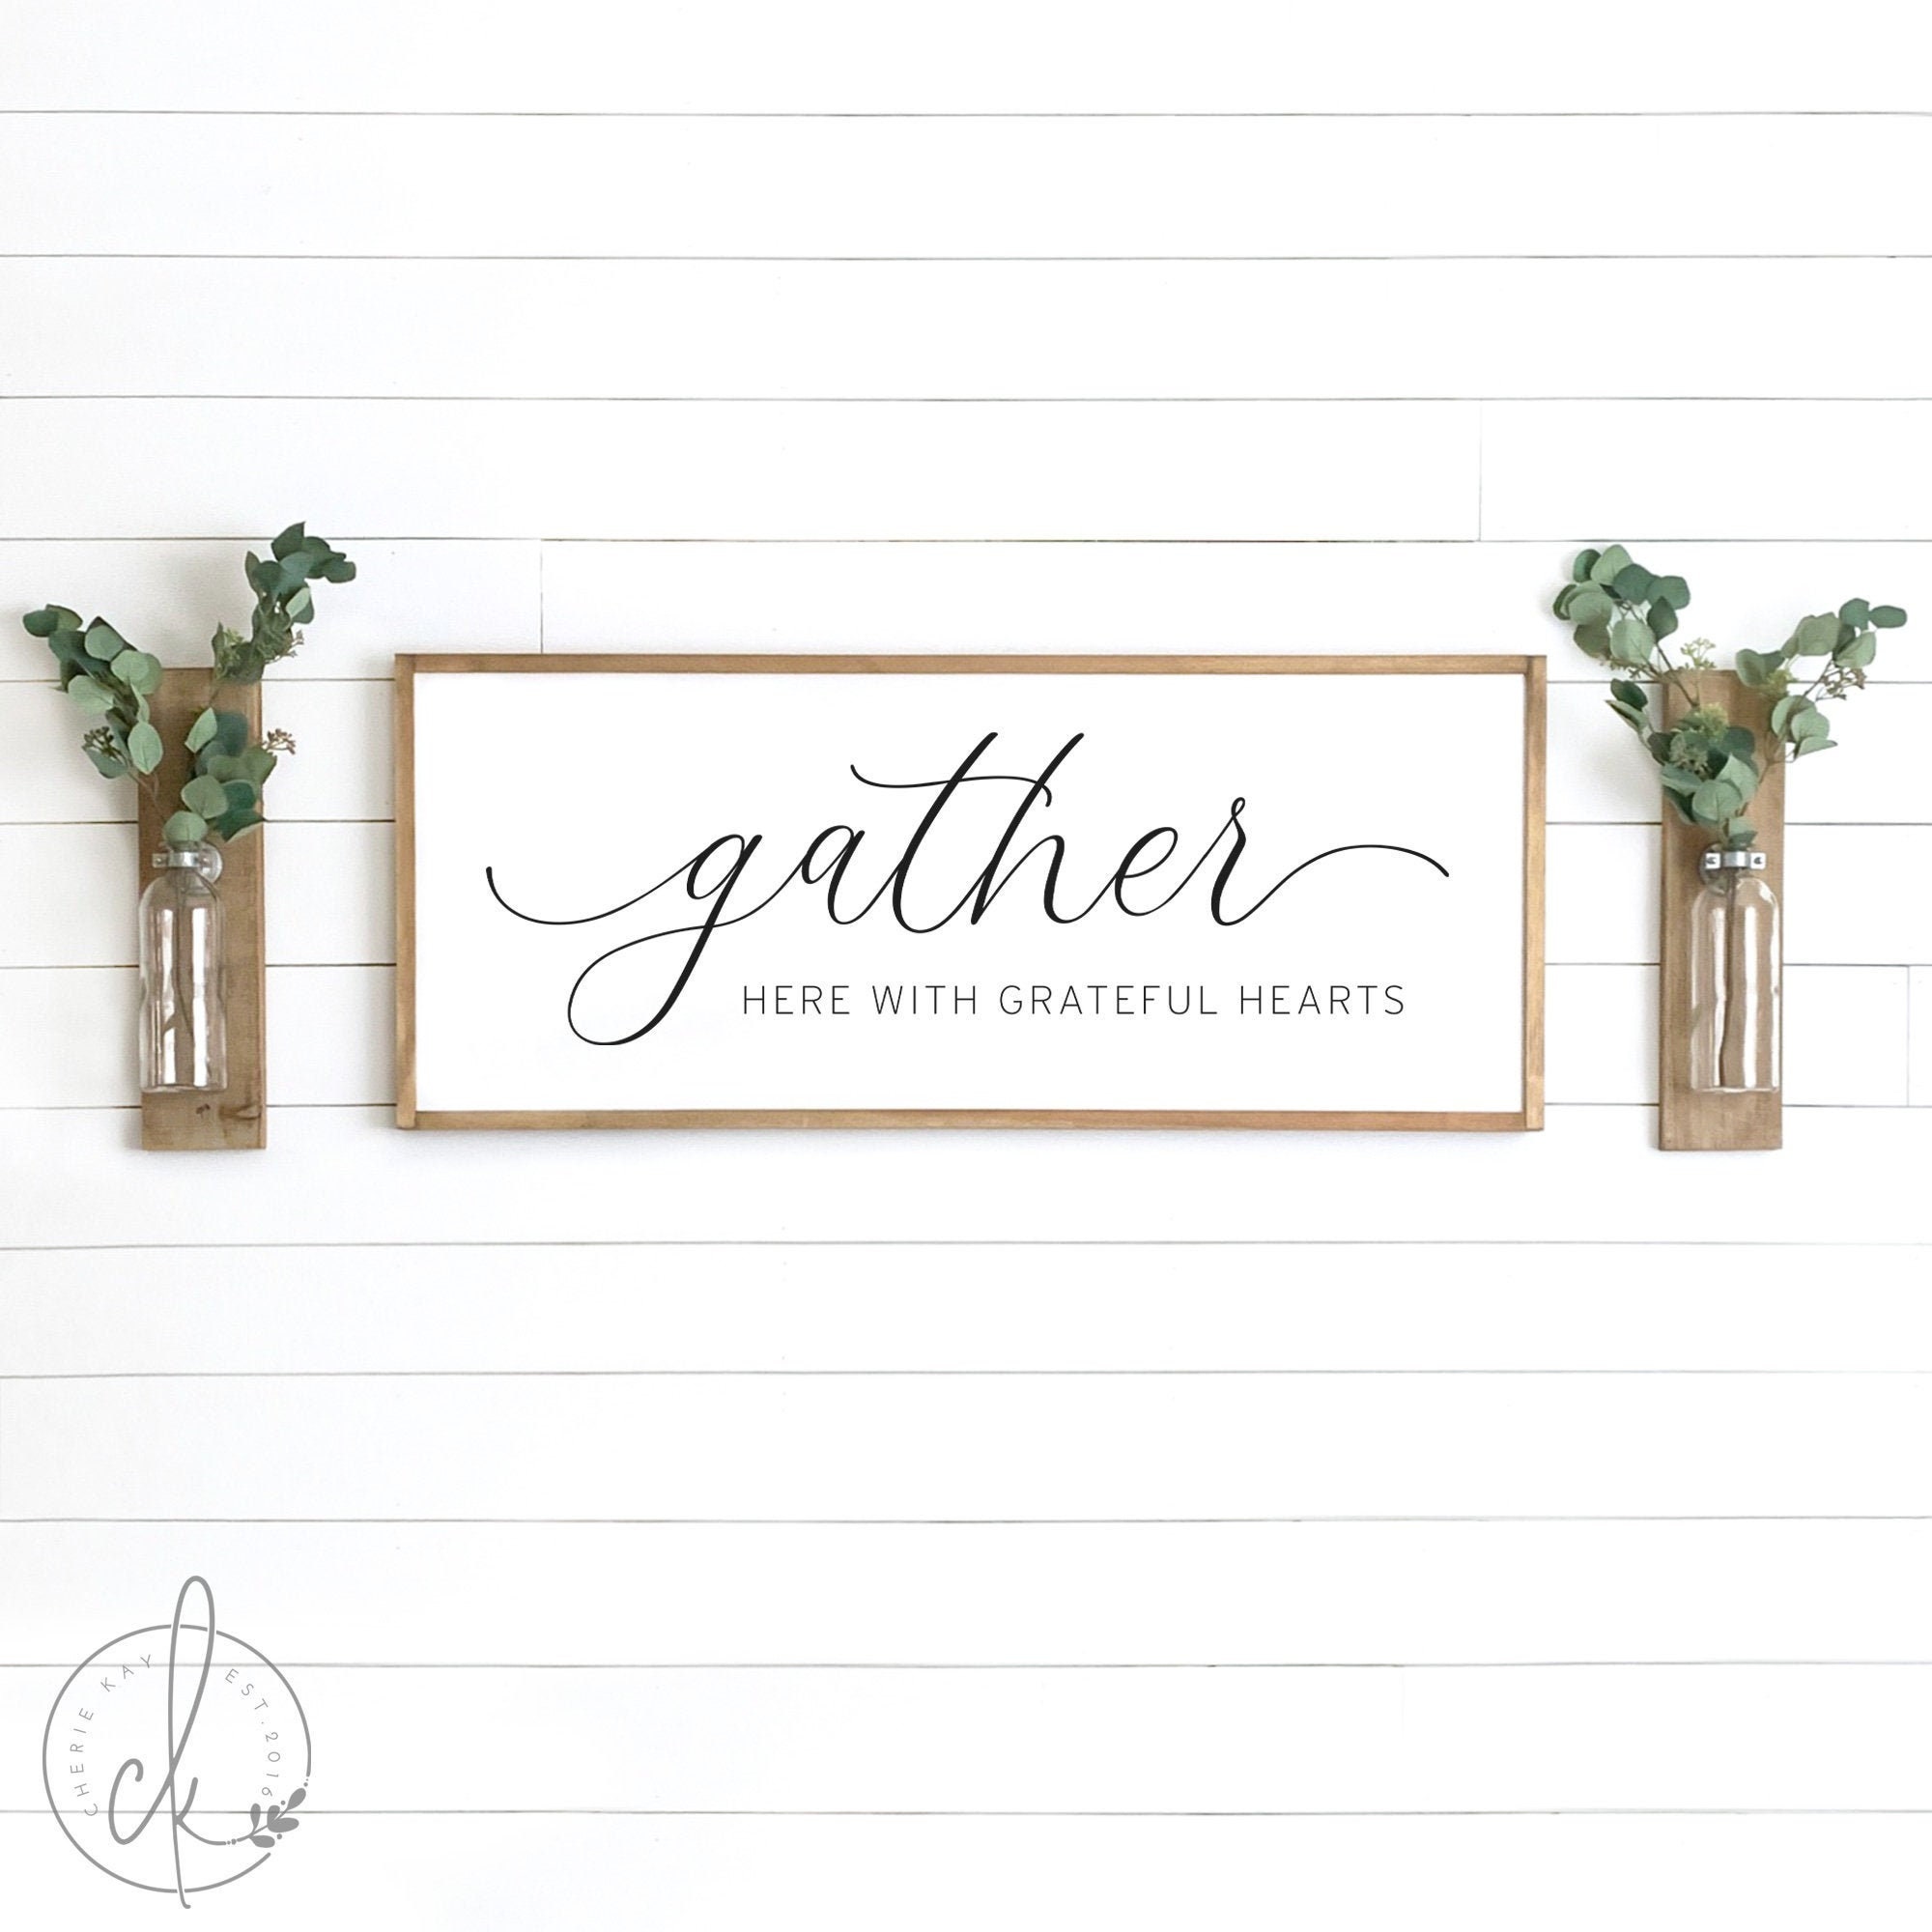 Welsh Decor script. Give us a sign. Gather here